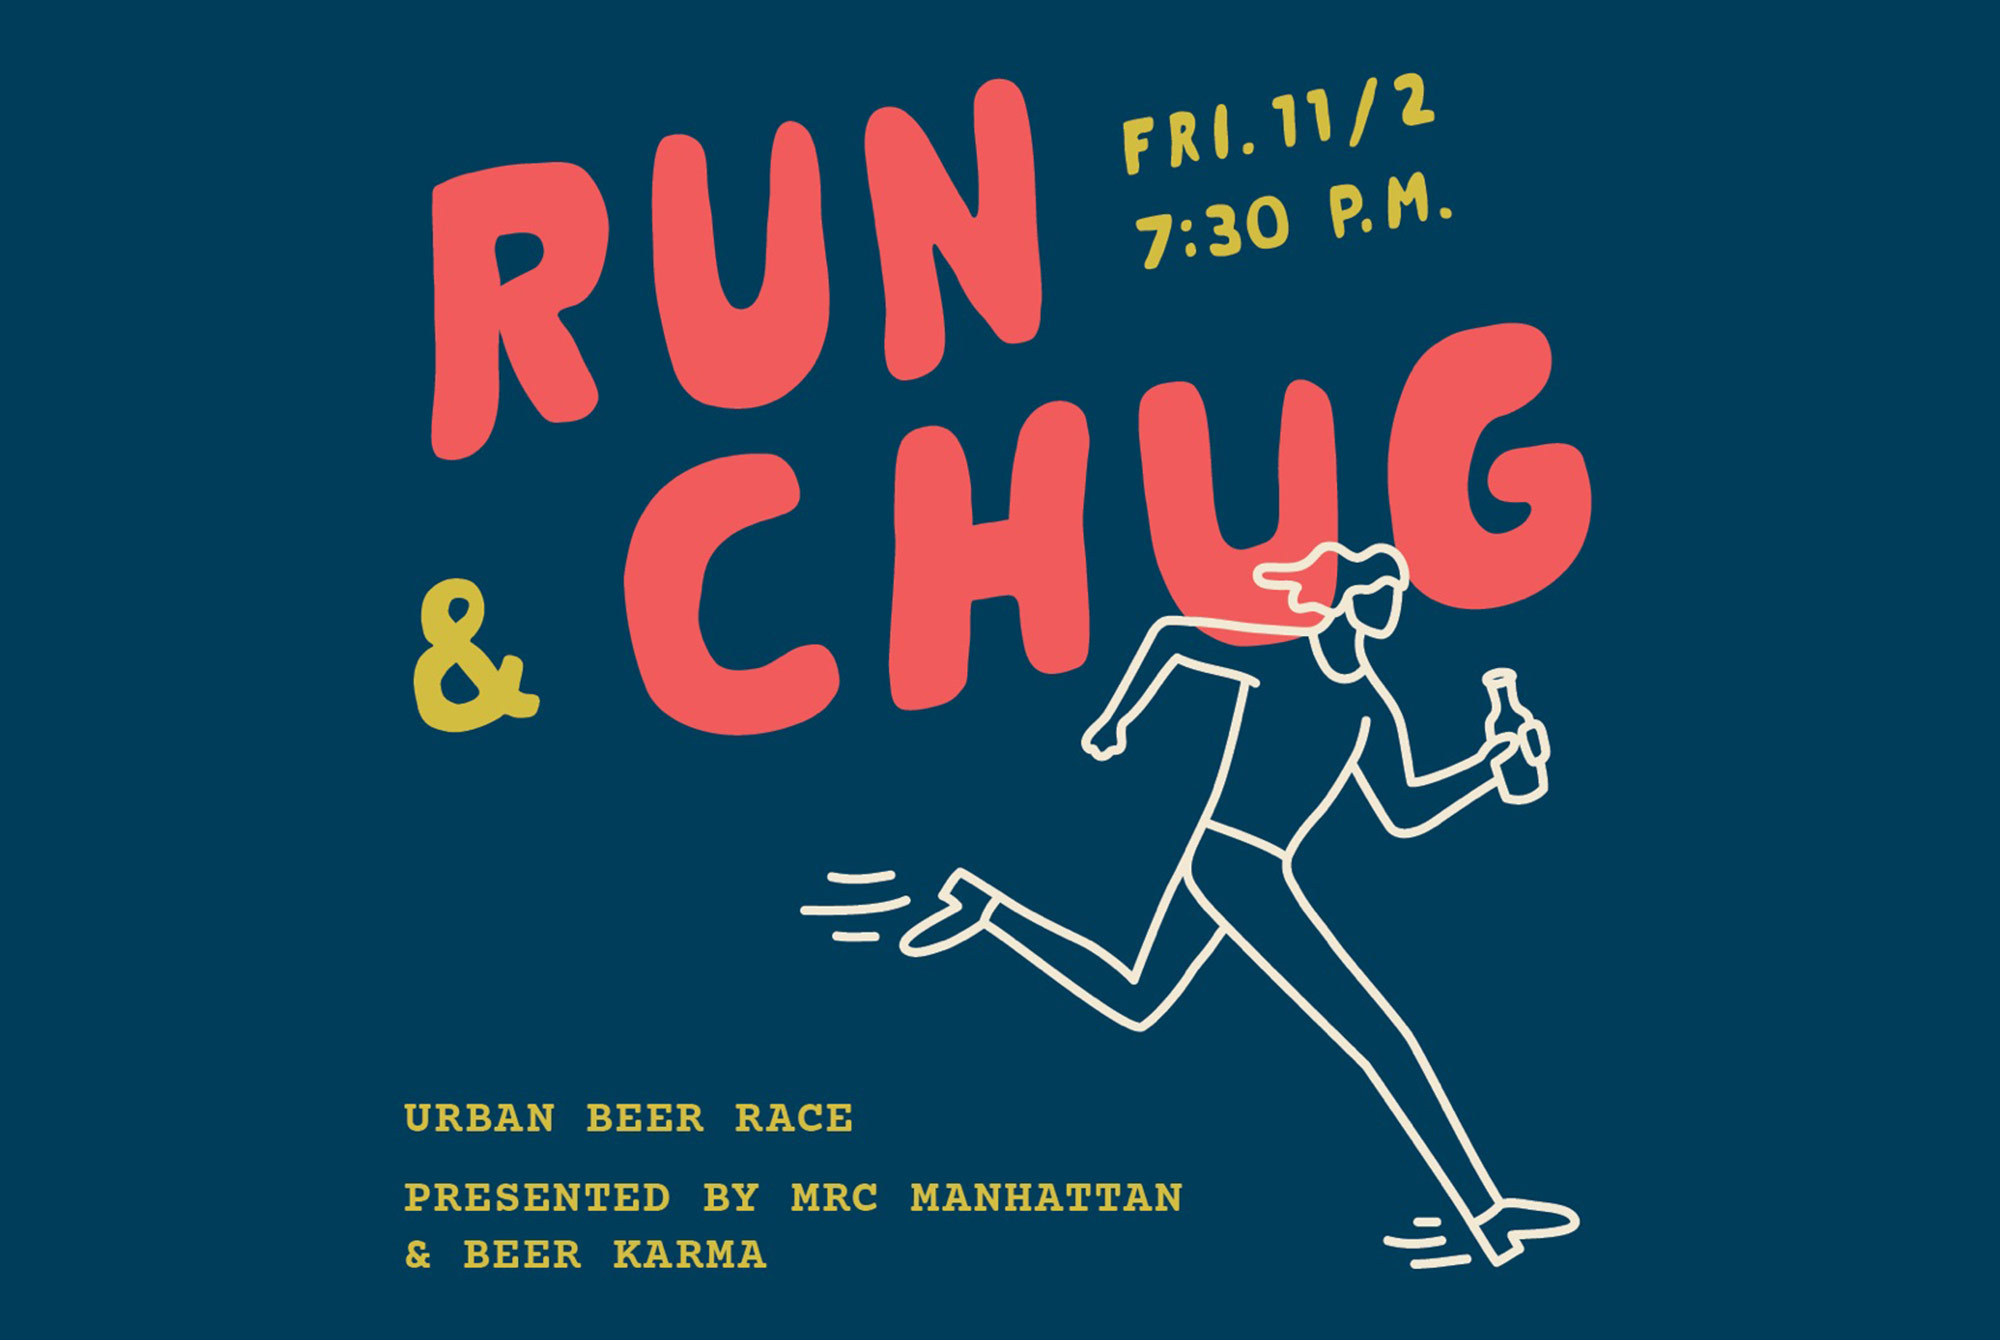 As Is, Beer Karma, and Mikkeller Run Club Team Up on Pre-NYC Marathon Event